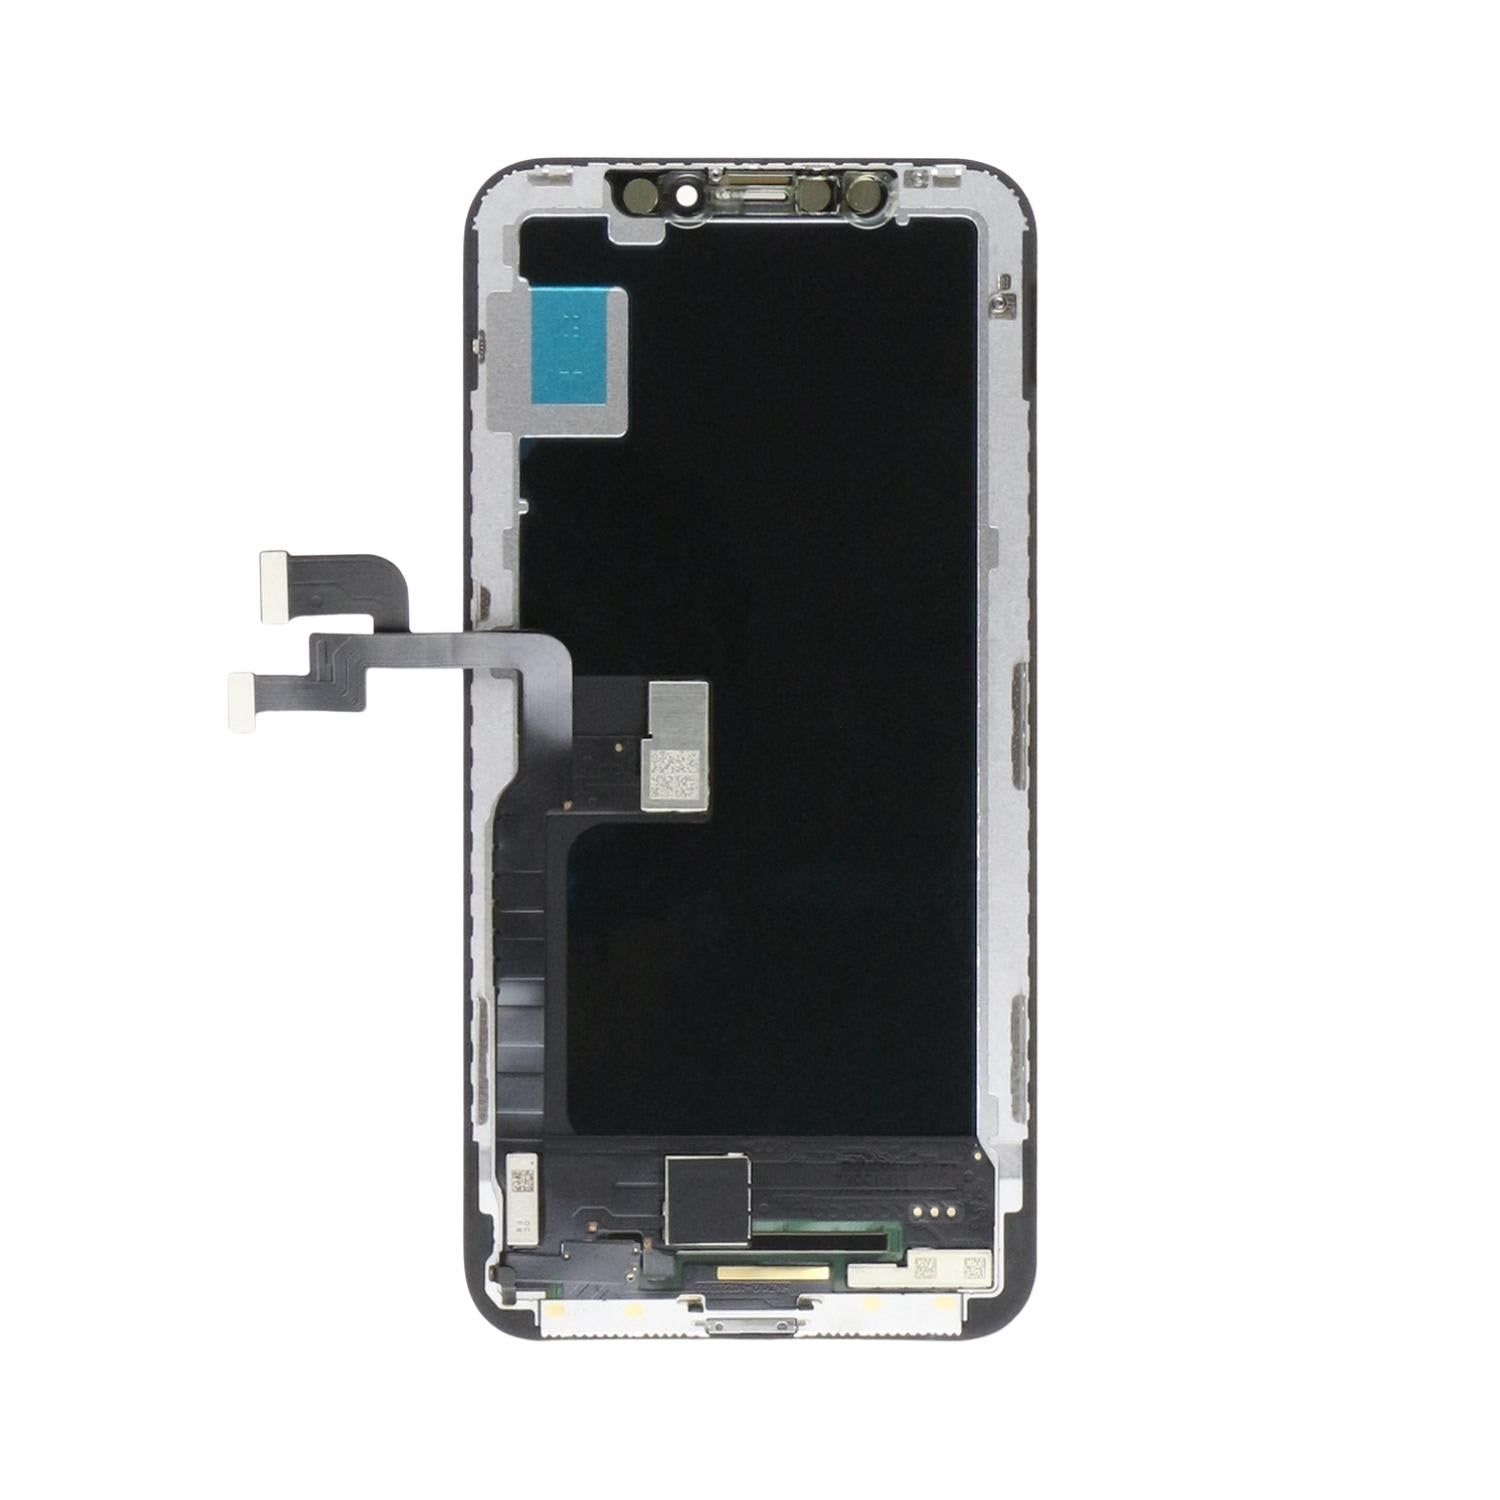 OLED and Digitizer Assembly for iPhone X (OLED Soft) (Breakage Coverage)